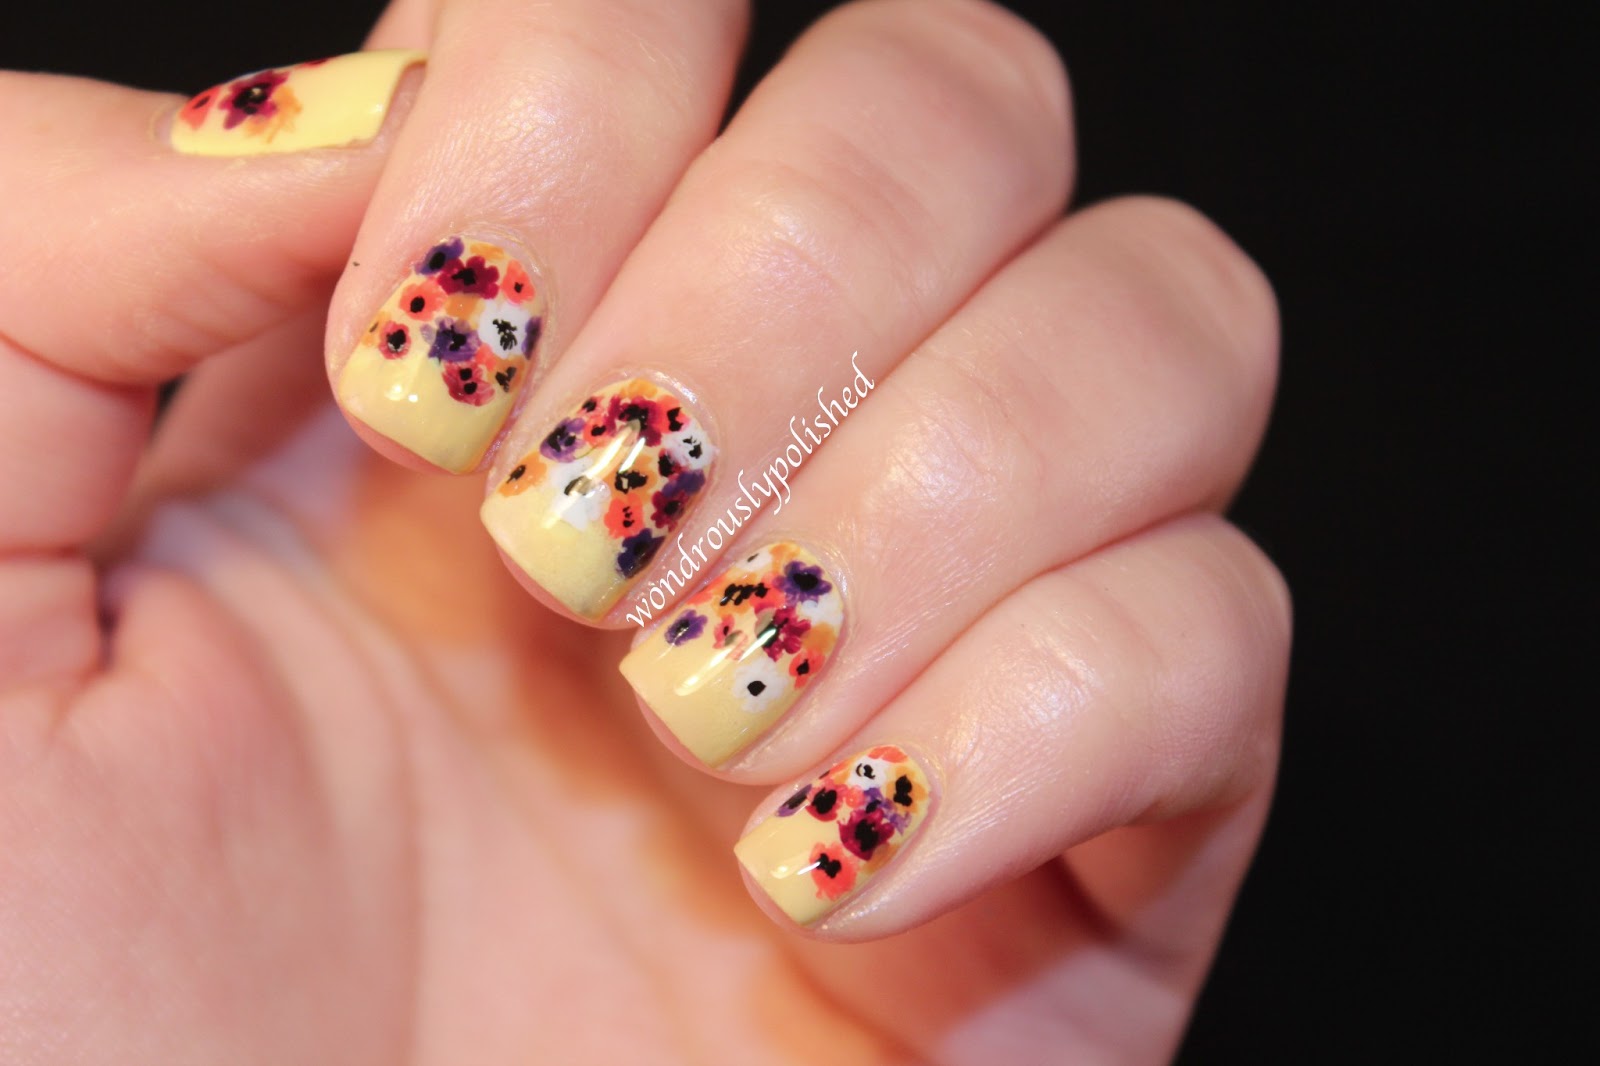 8. "February Nail Art: Designs and Techniques to Try" - wide 9